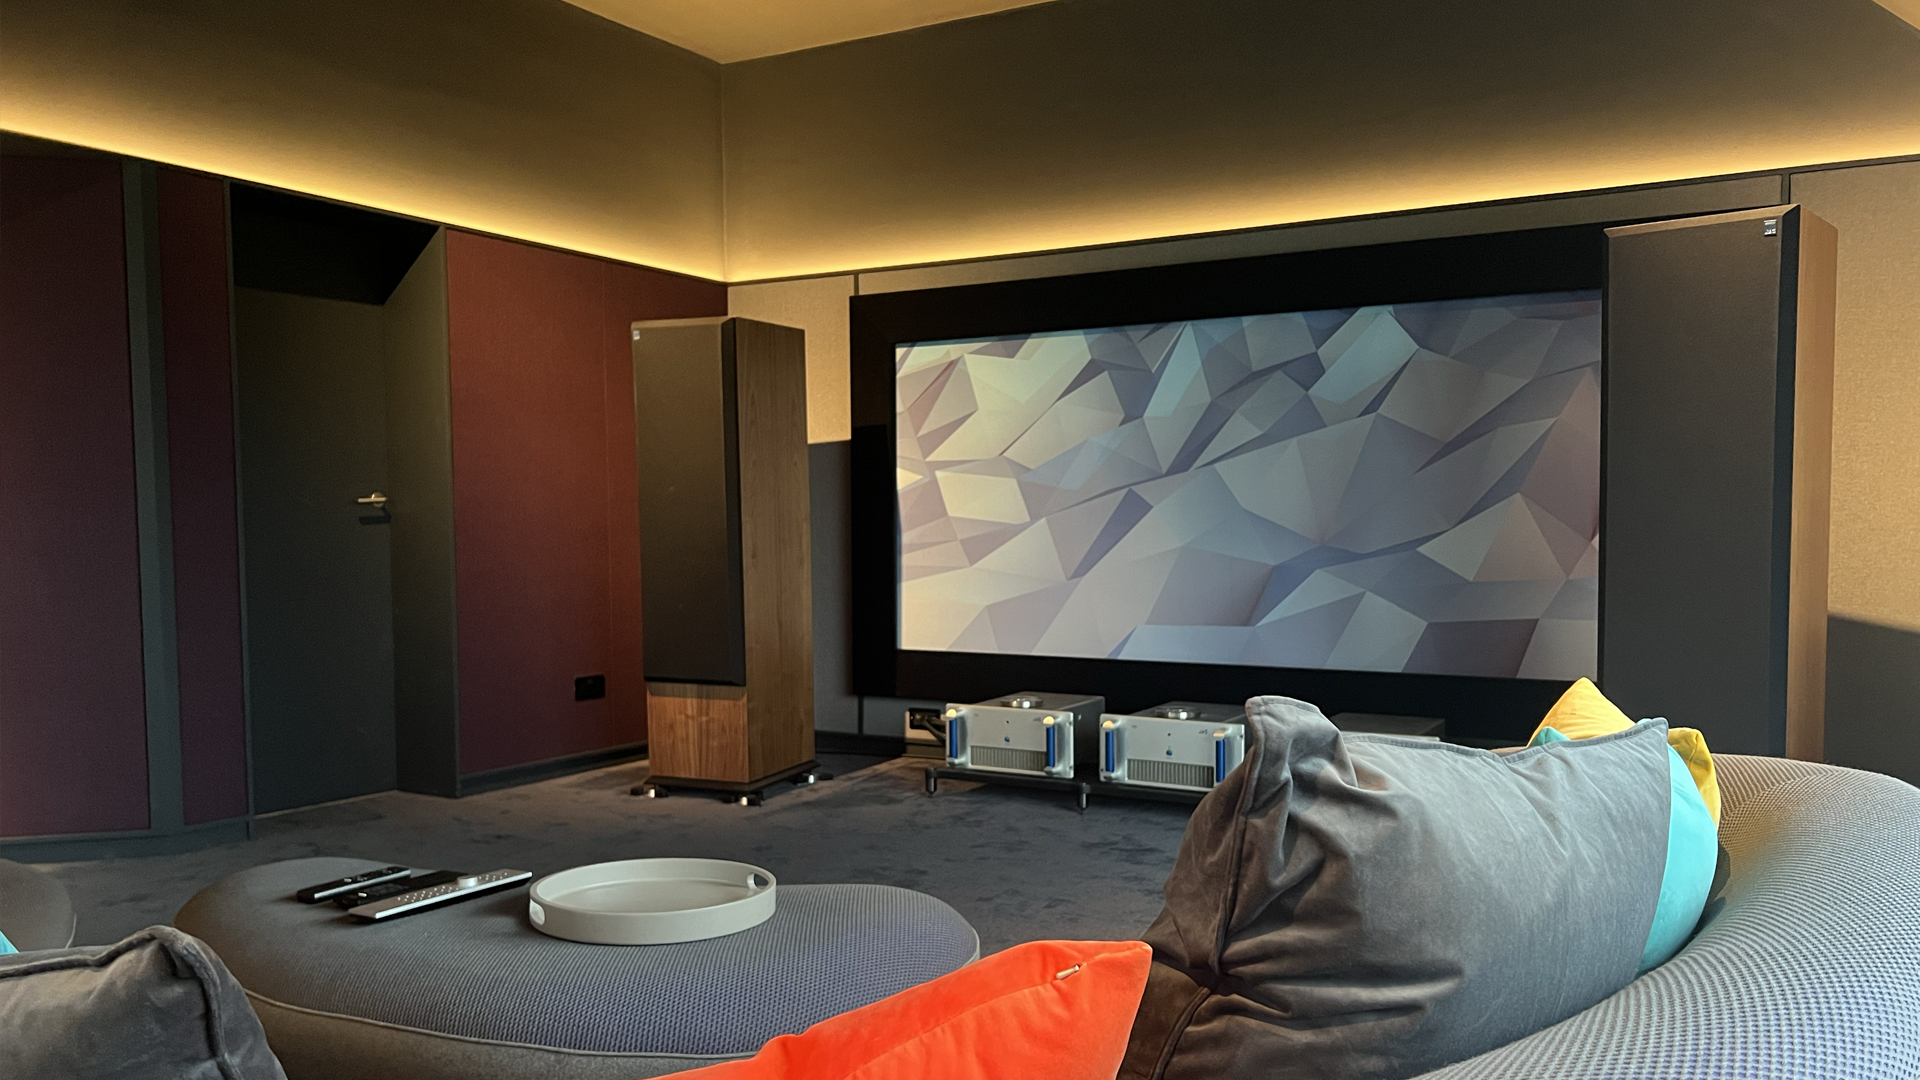 The room in Hi-Fi listening mode. The screen can showcase the artwork you choose from a wide variety of styles.